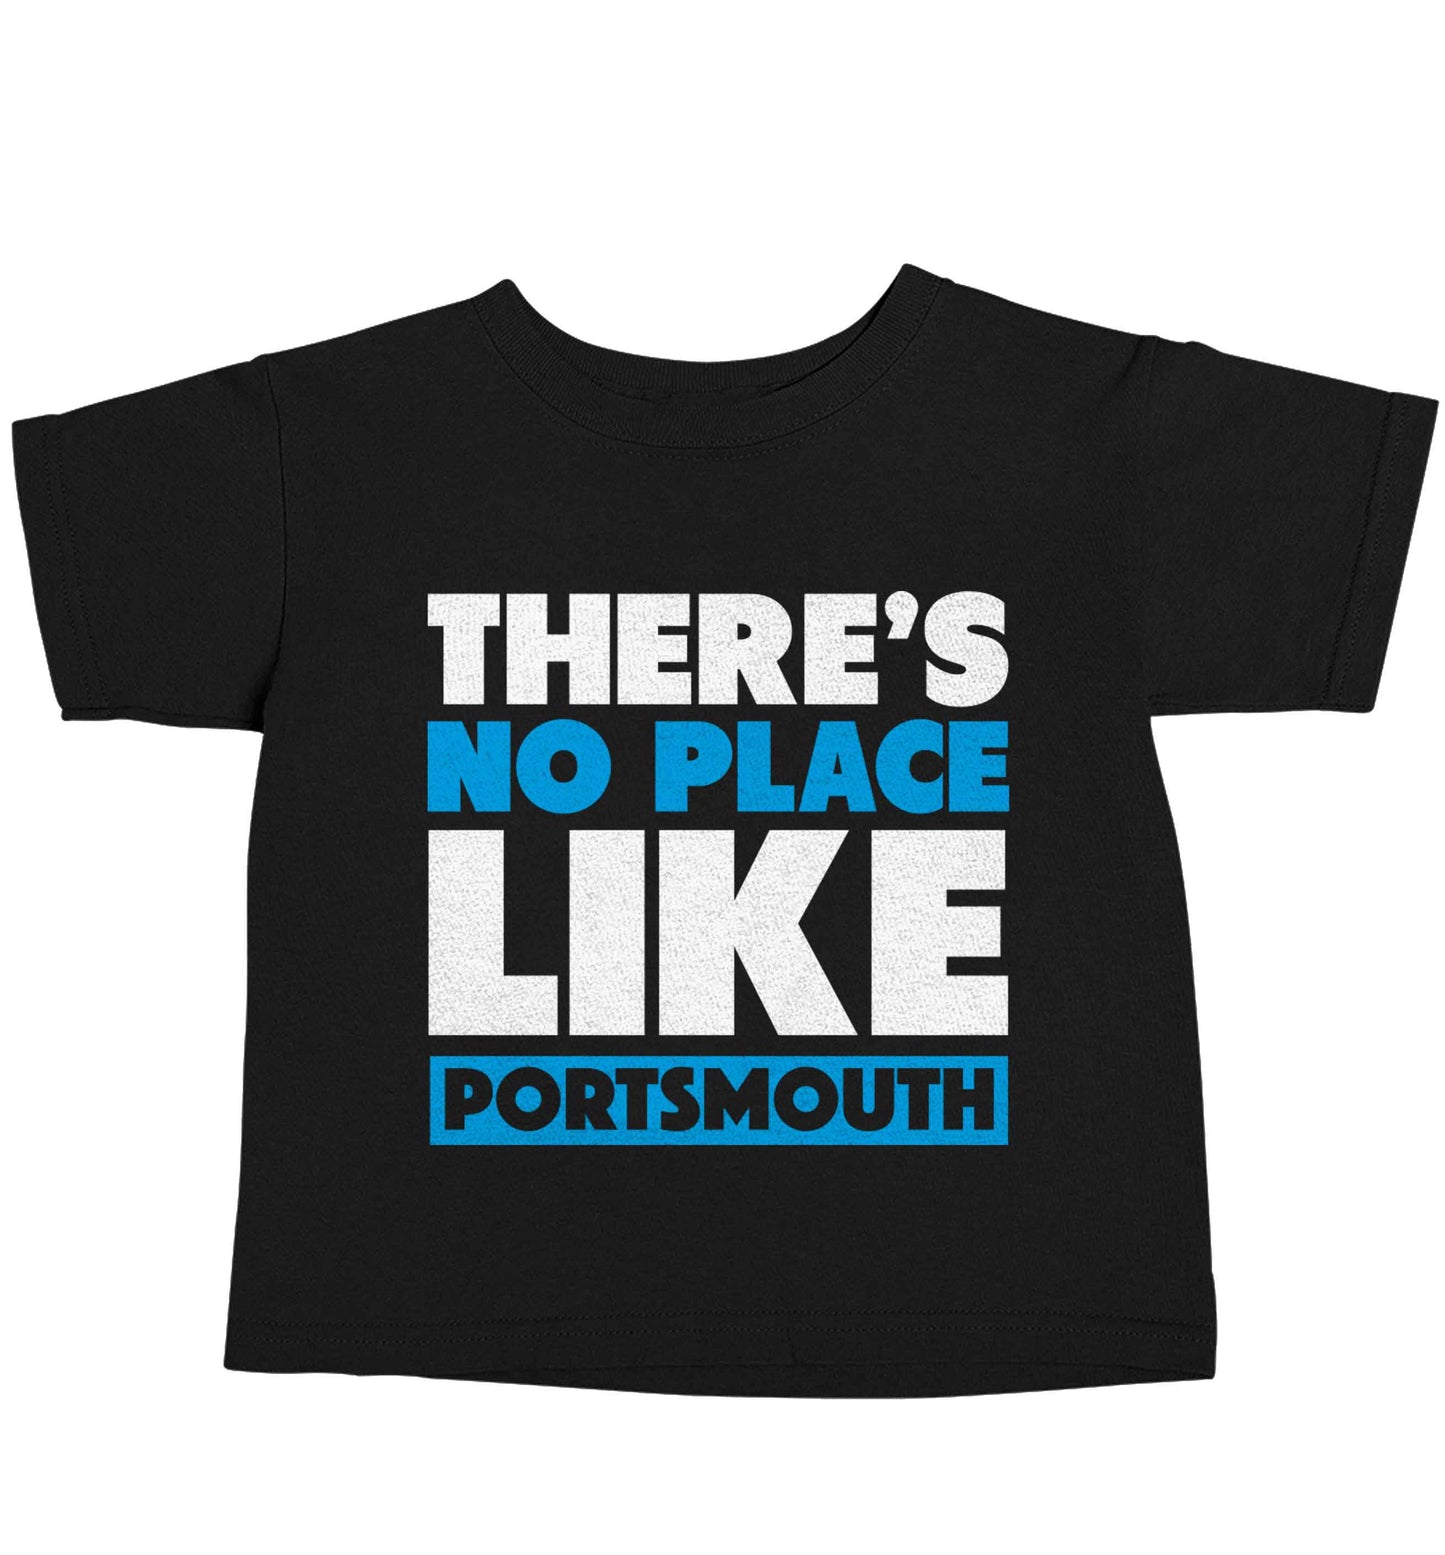 There's no place like Porstmouth Black baby toddler Tshirt 2 years